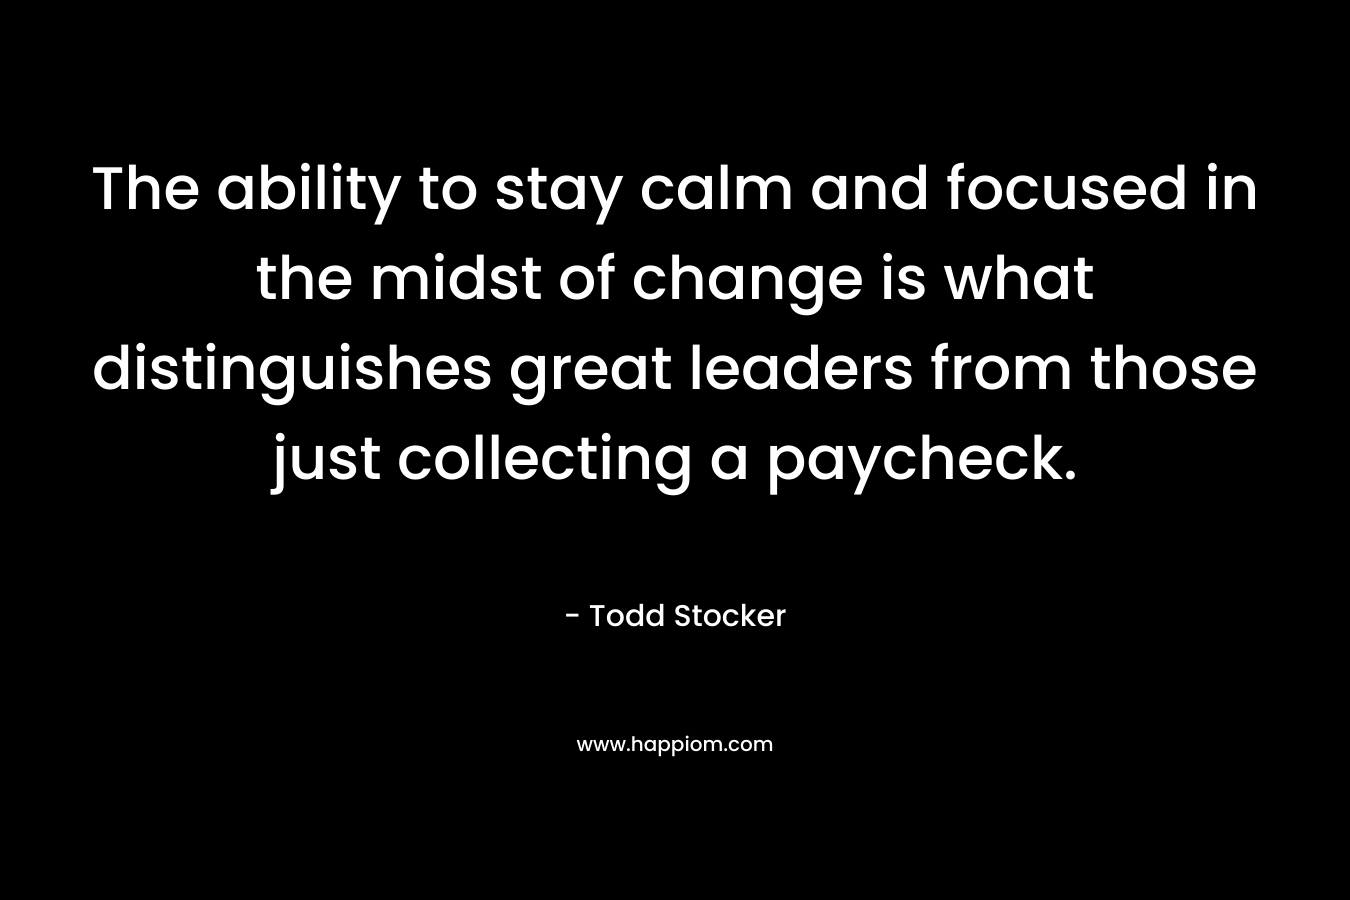 The ability to stay calm and focused in the midst of change is what distinguishes great leaders from those just collecting a paycheck.